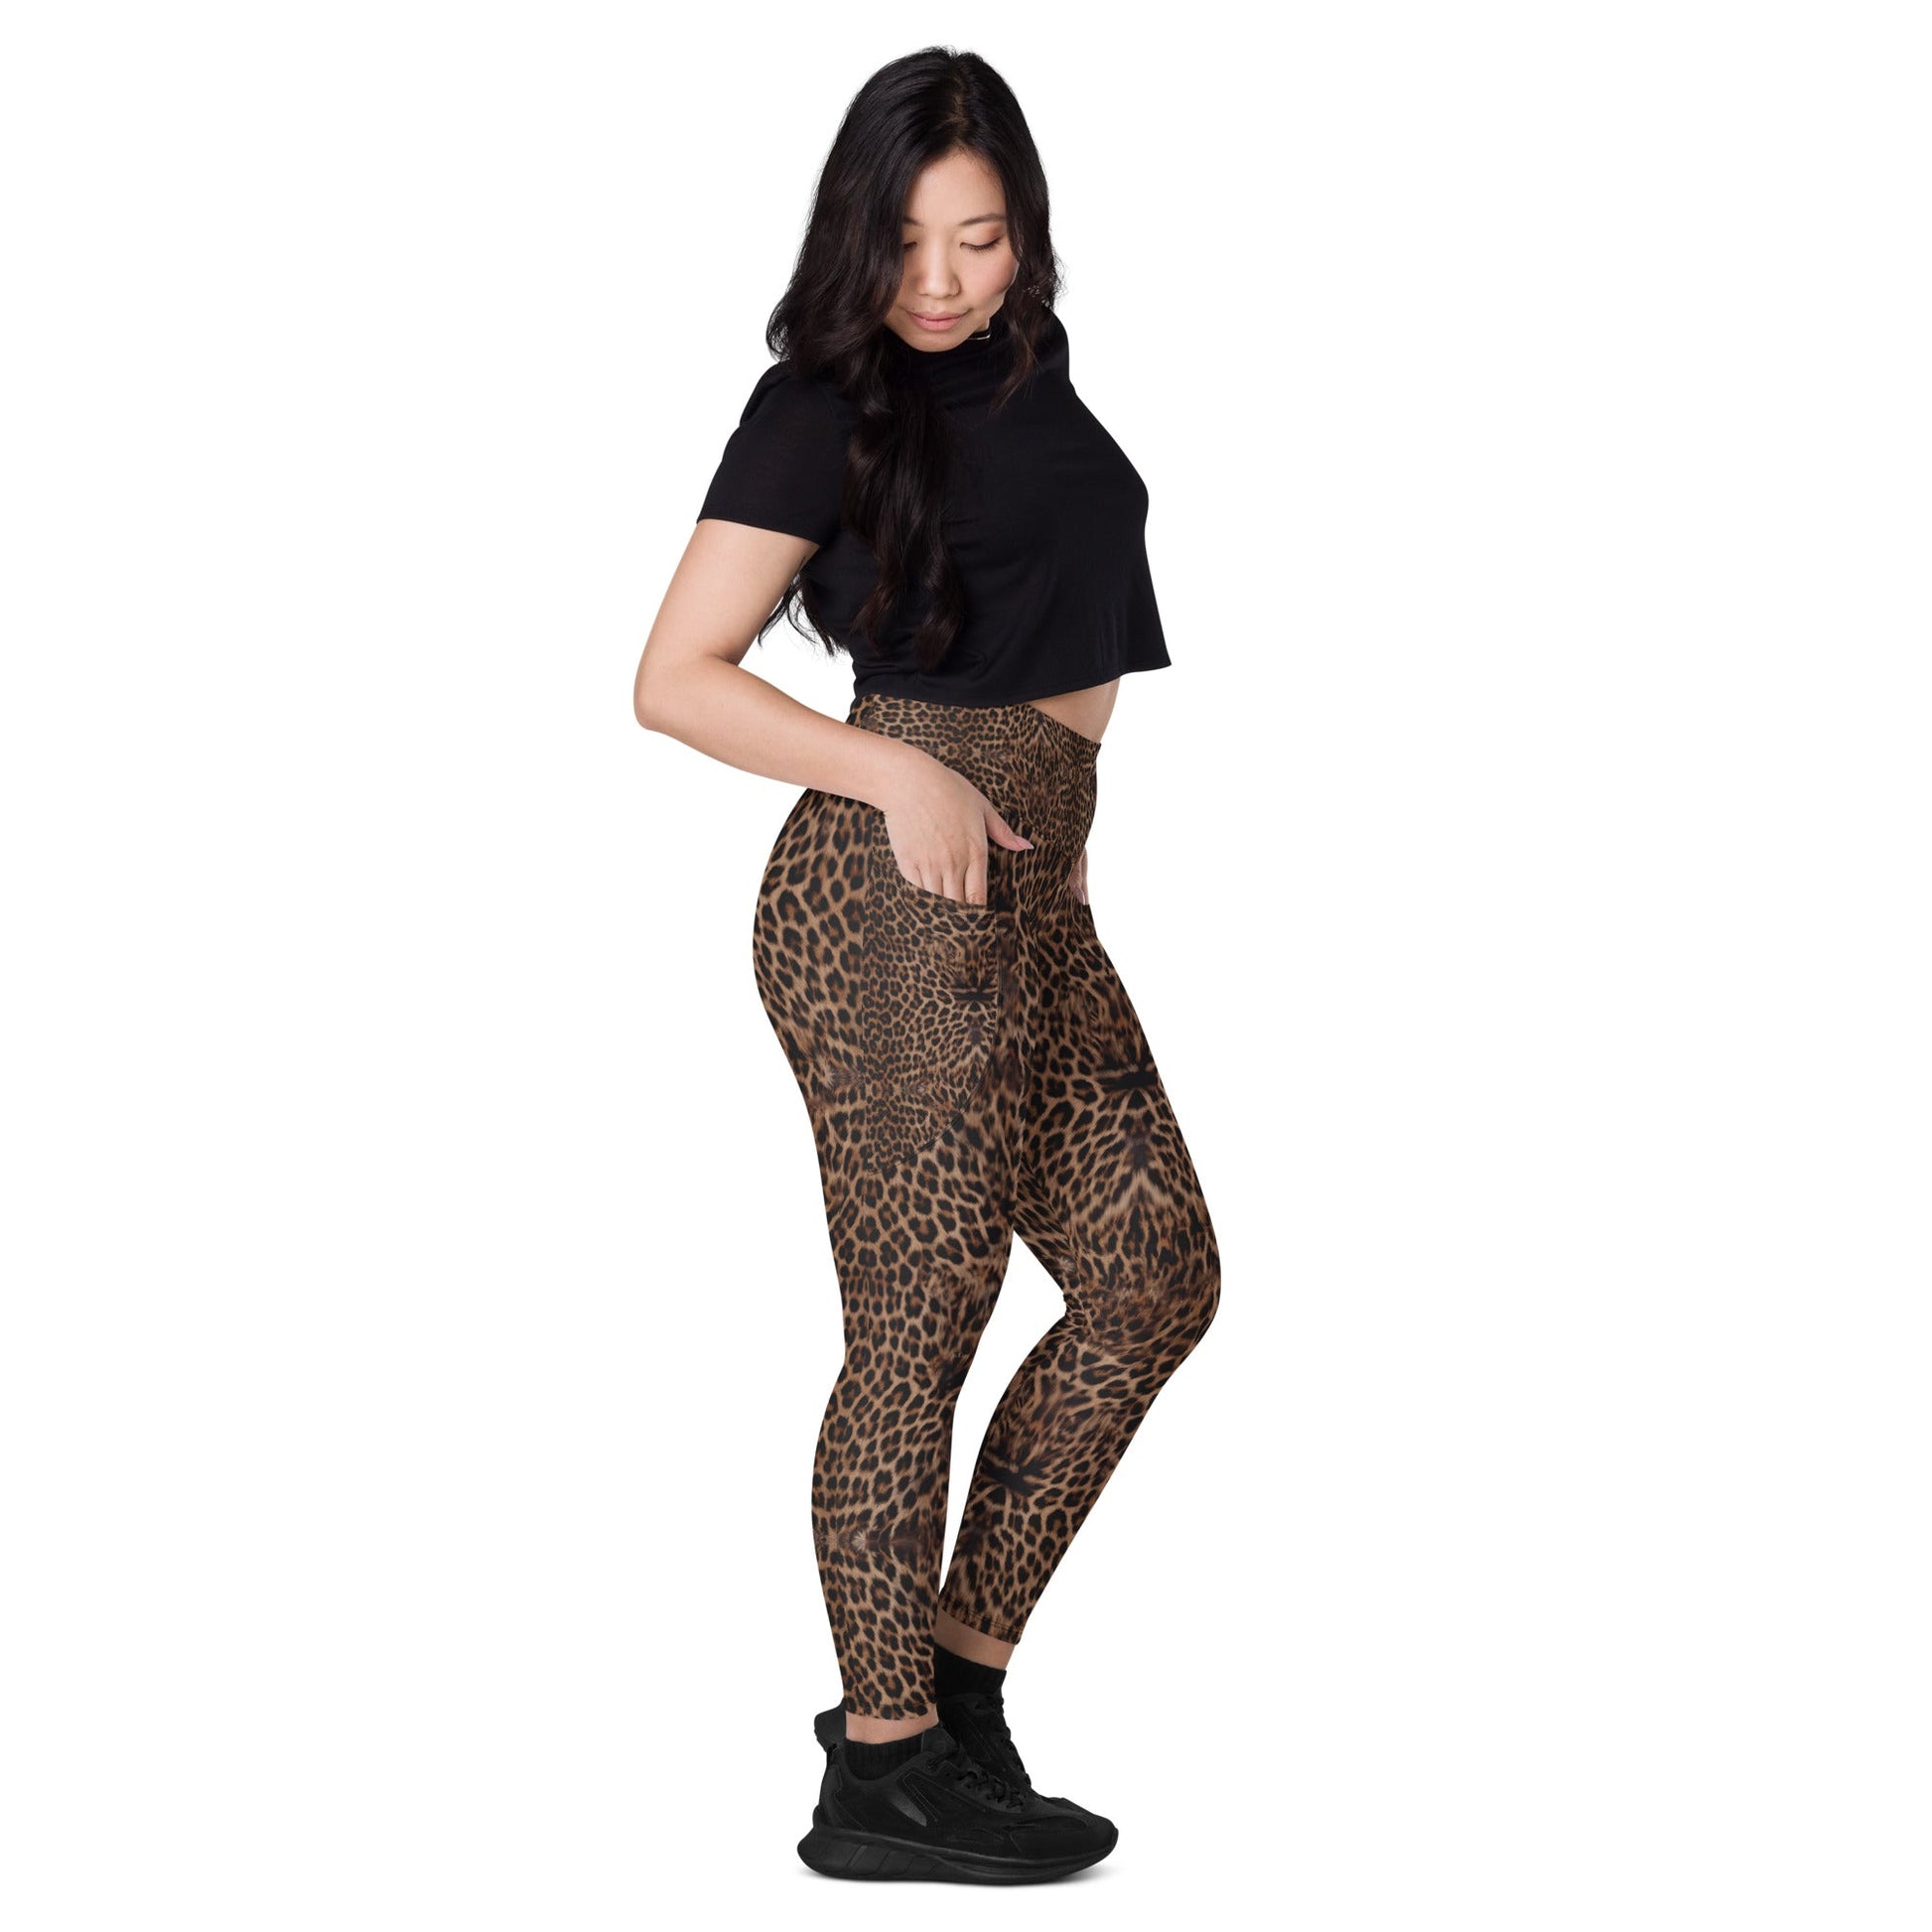 Leopard Leggings with Pockets! - Alfano Dry Goods